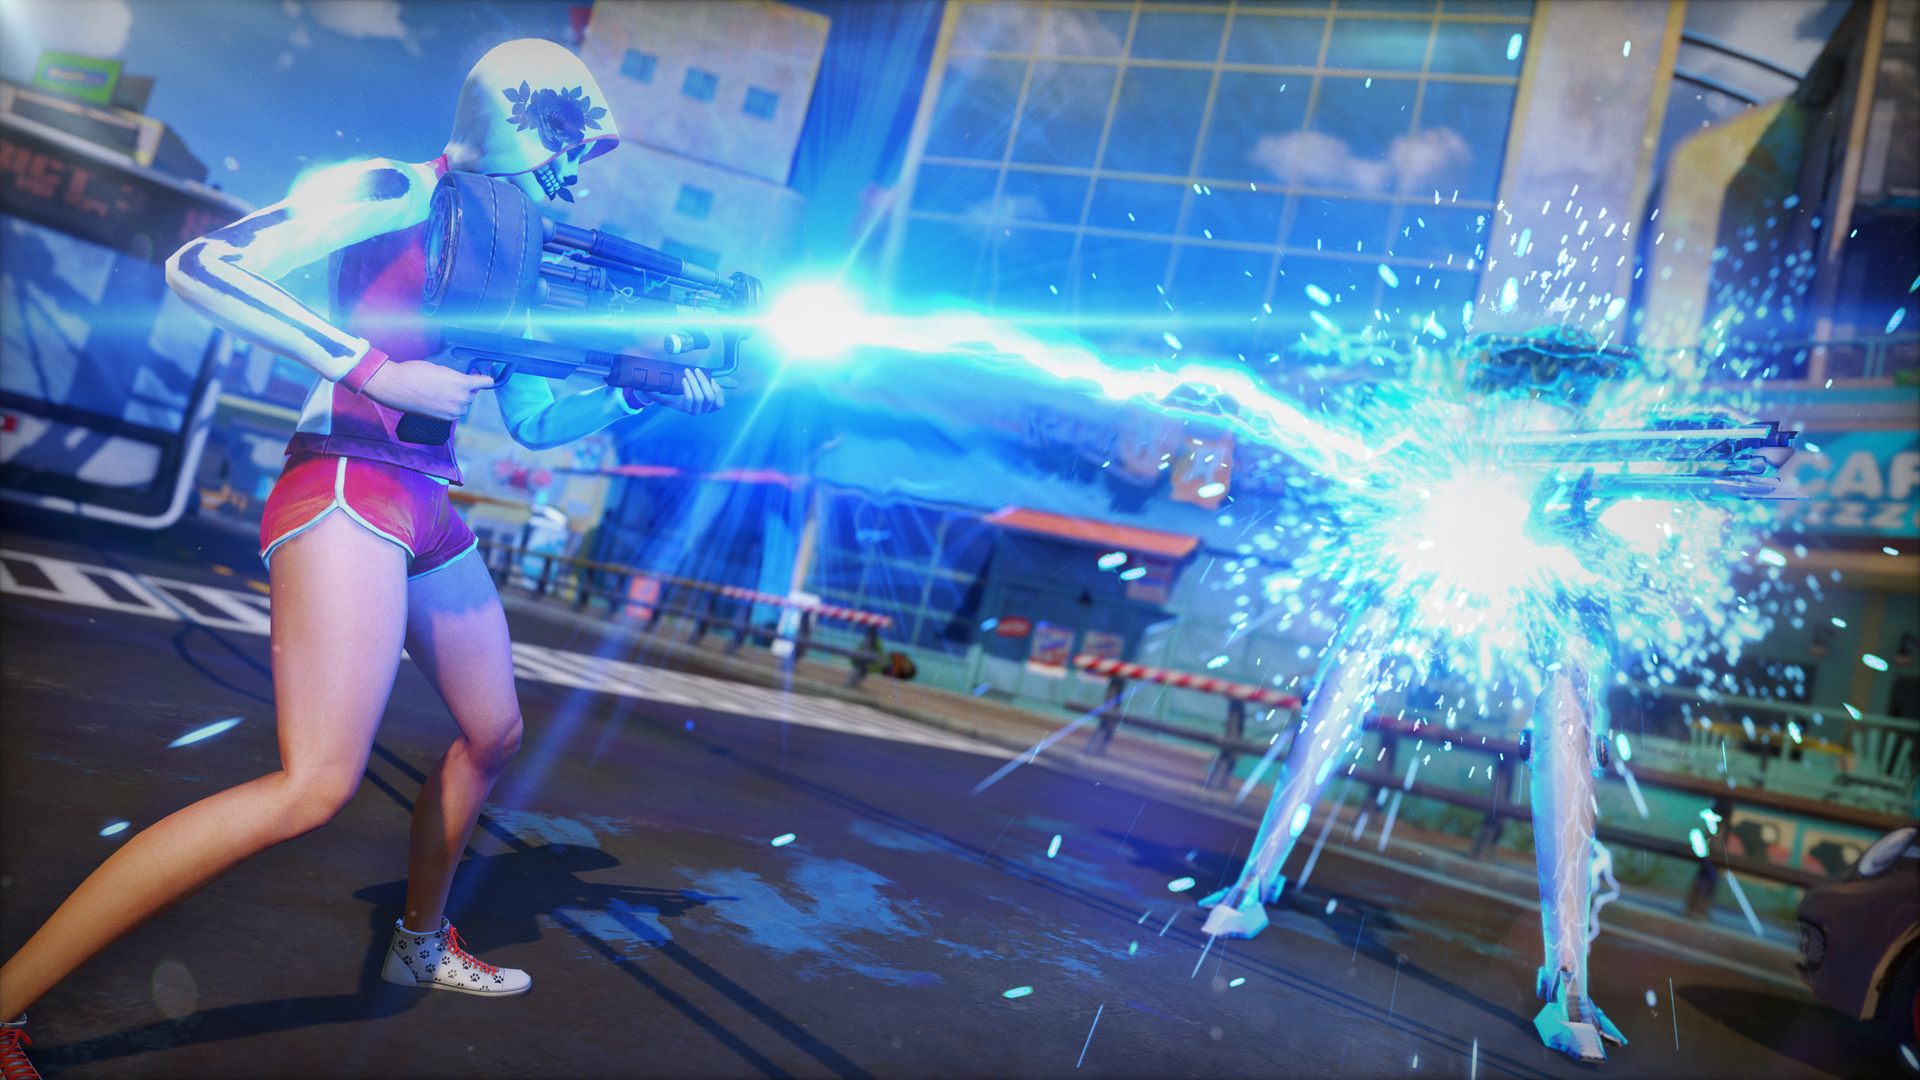 Sunset Overdrive (PC) Review